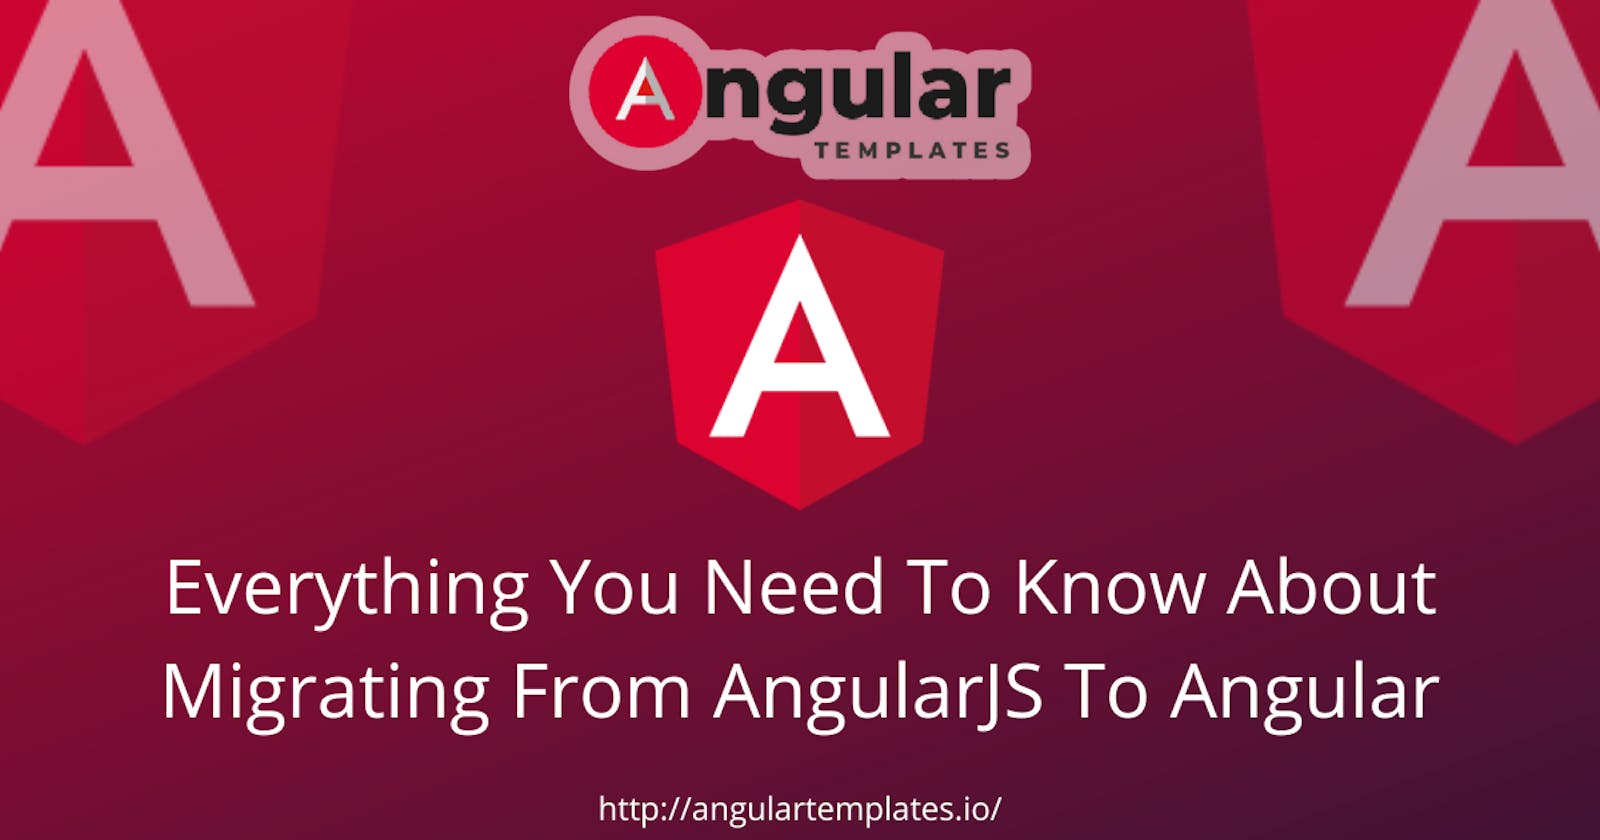 Everything You Need To Know About Migrating From AngularJS To Angular